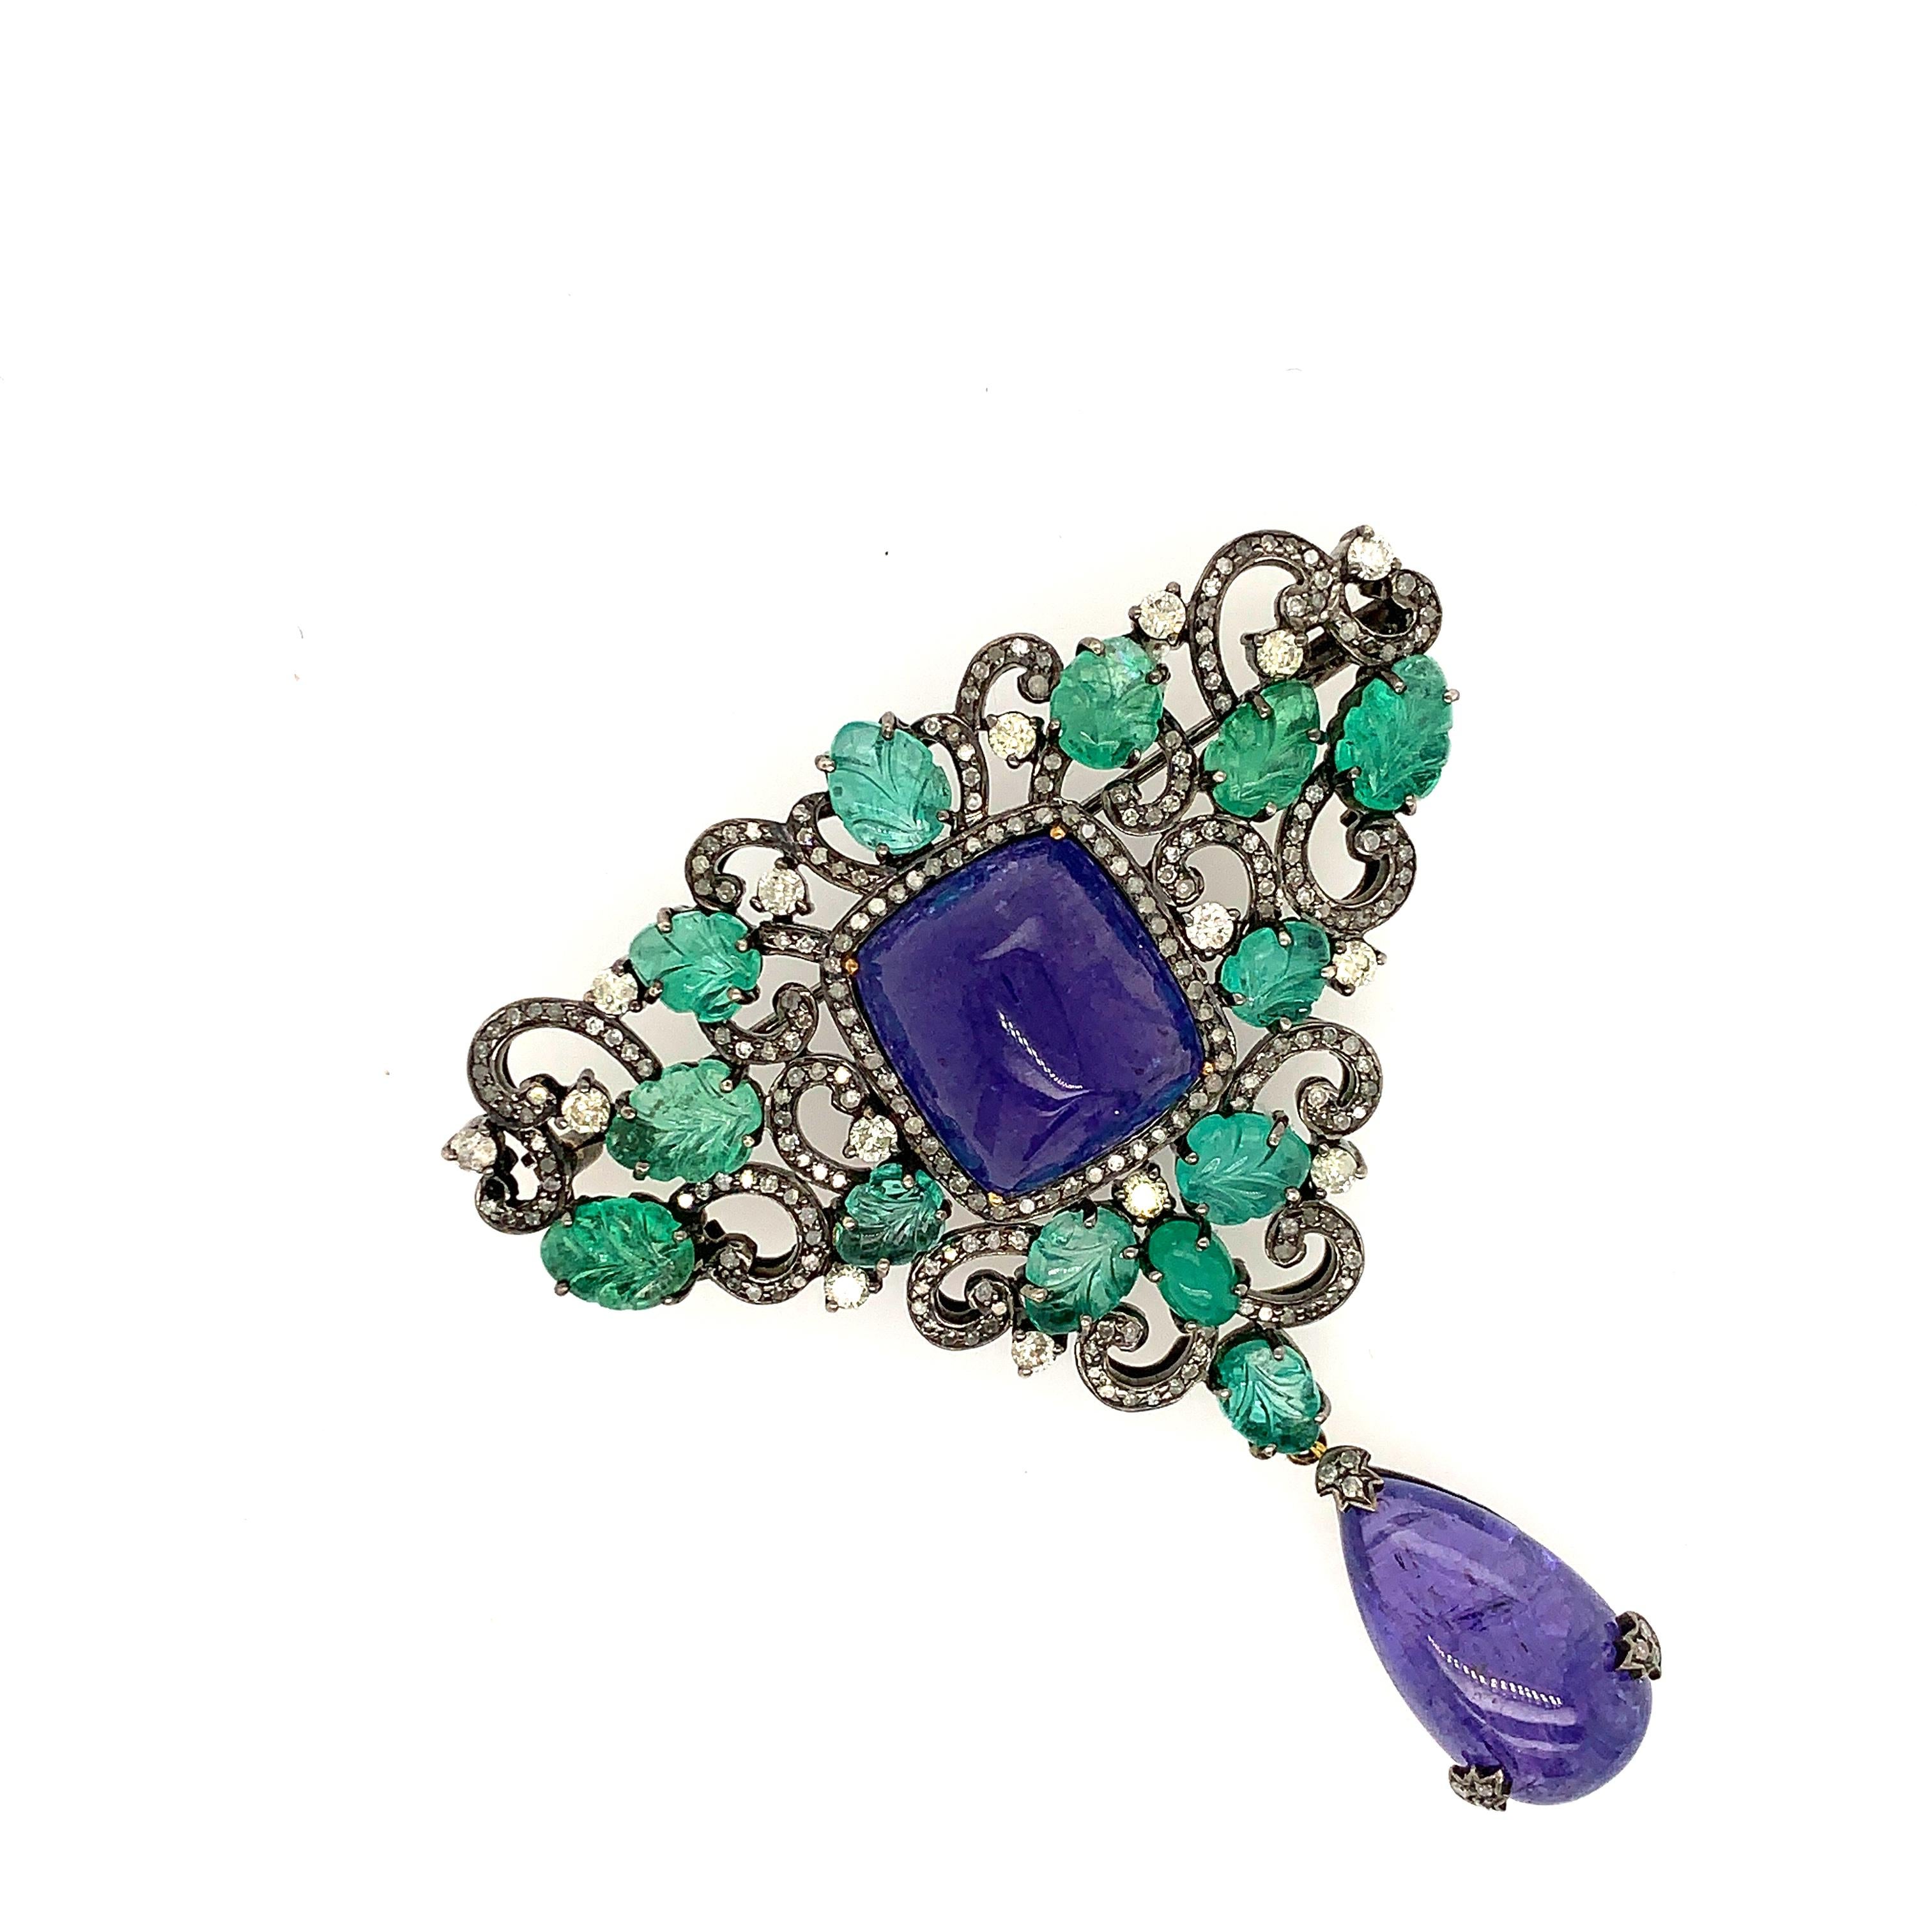 Beautiful Tanzanite Emerald Diamond Designer Brooch which can be converted into pendant also just by slipping a chain through.

18KT: 1.96g
Diamond: 2.04ct
SI: 11.558gms 
EMERALD:11.62ct,
TANZANITE:31.2ct